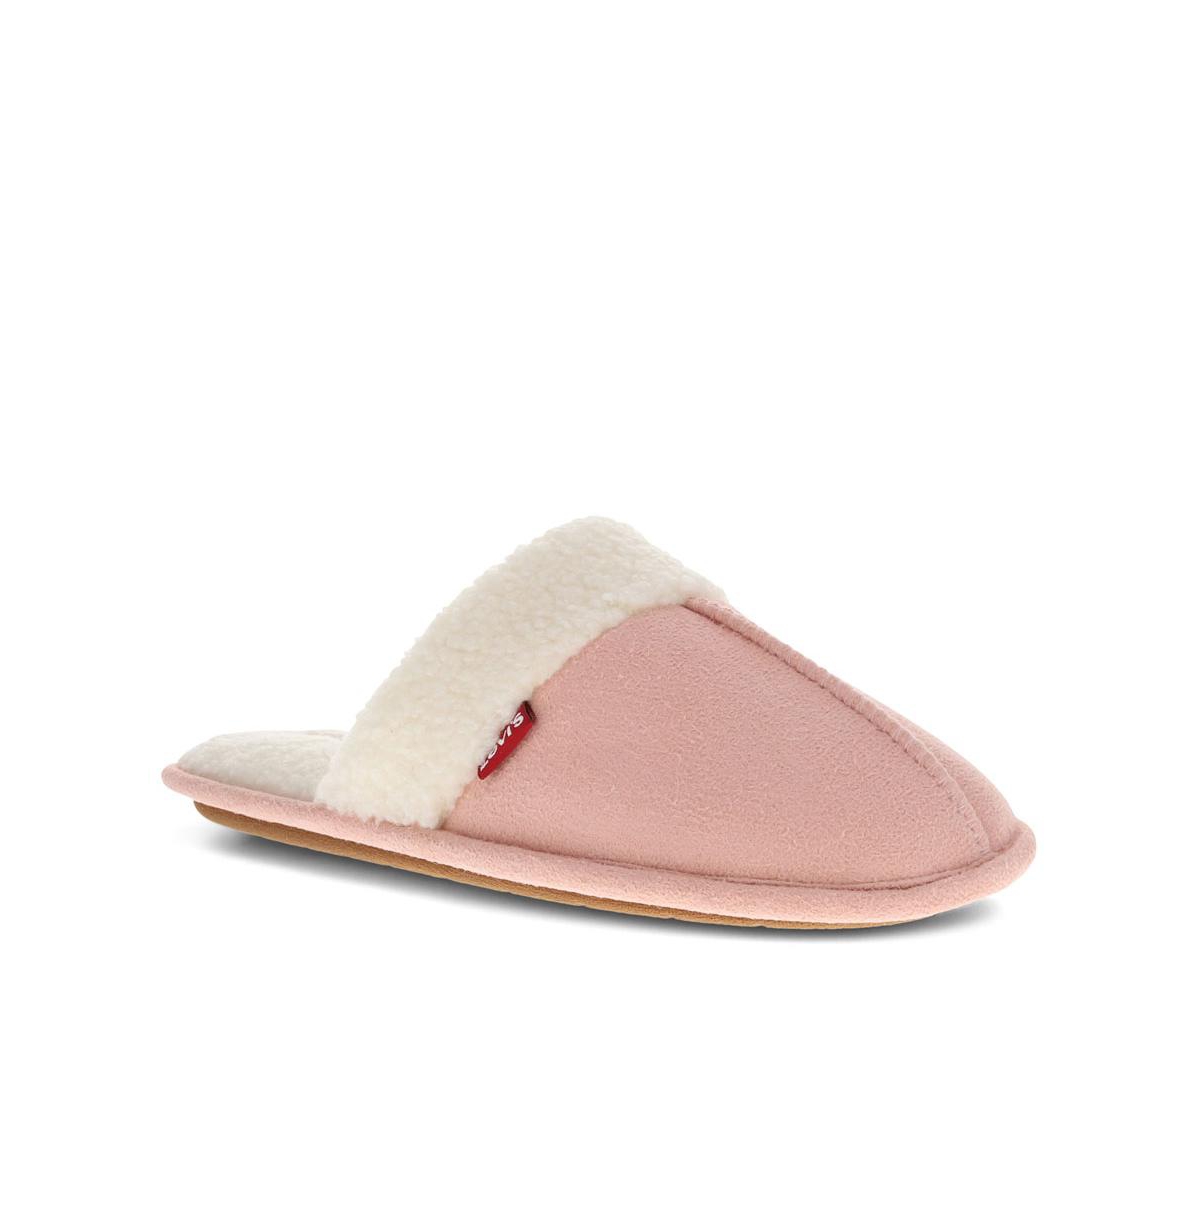 LEVI'S WOMEN'S TALYA MICRO SUEDE SCUFF HOUSE SHOE SLIPPERS